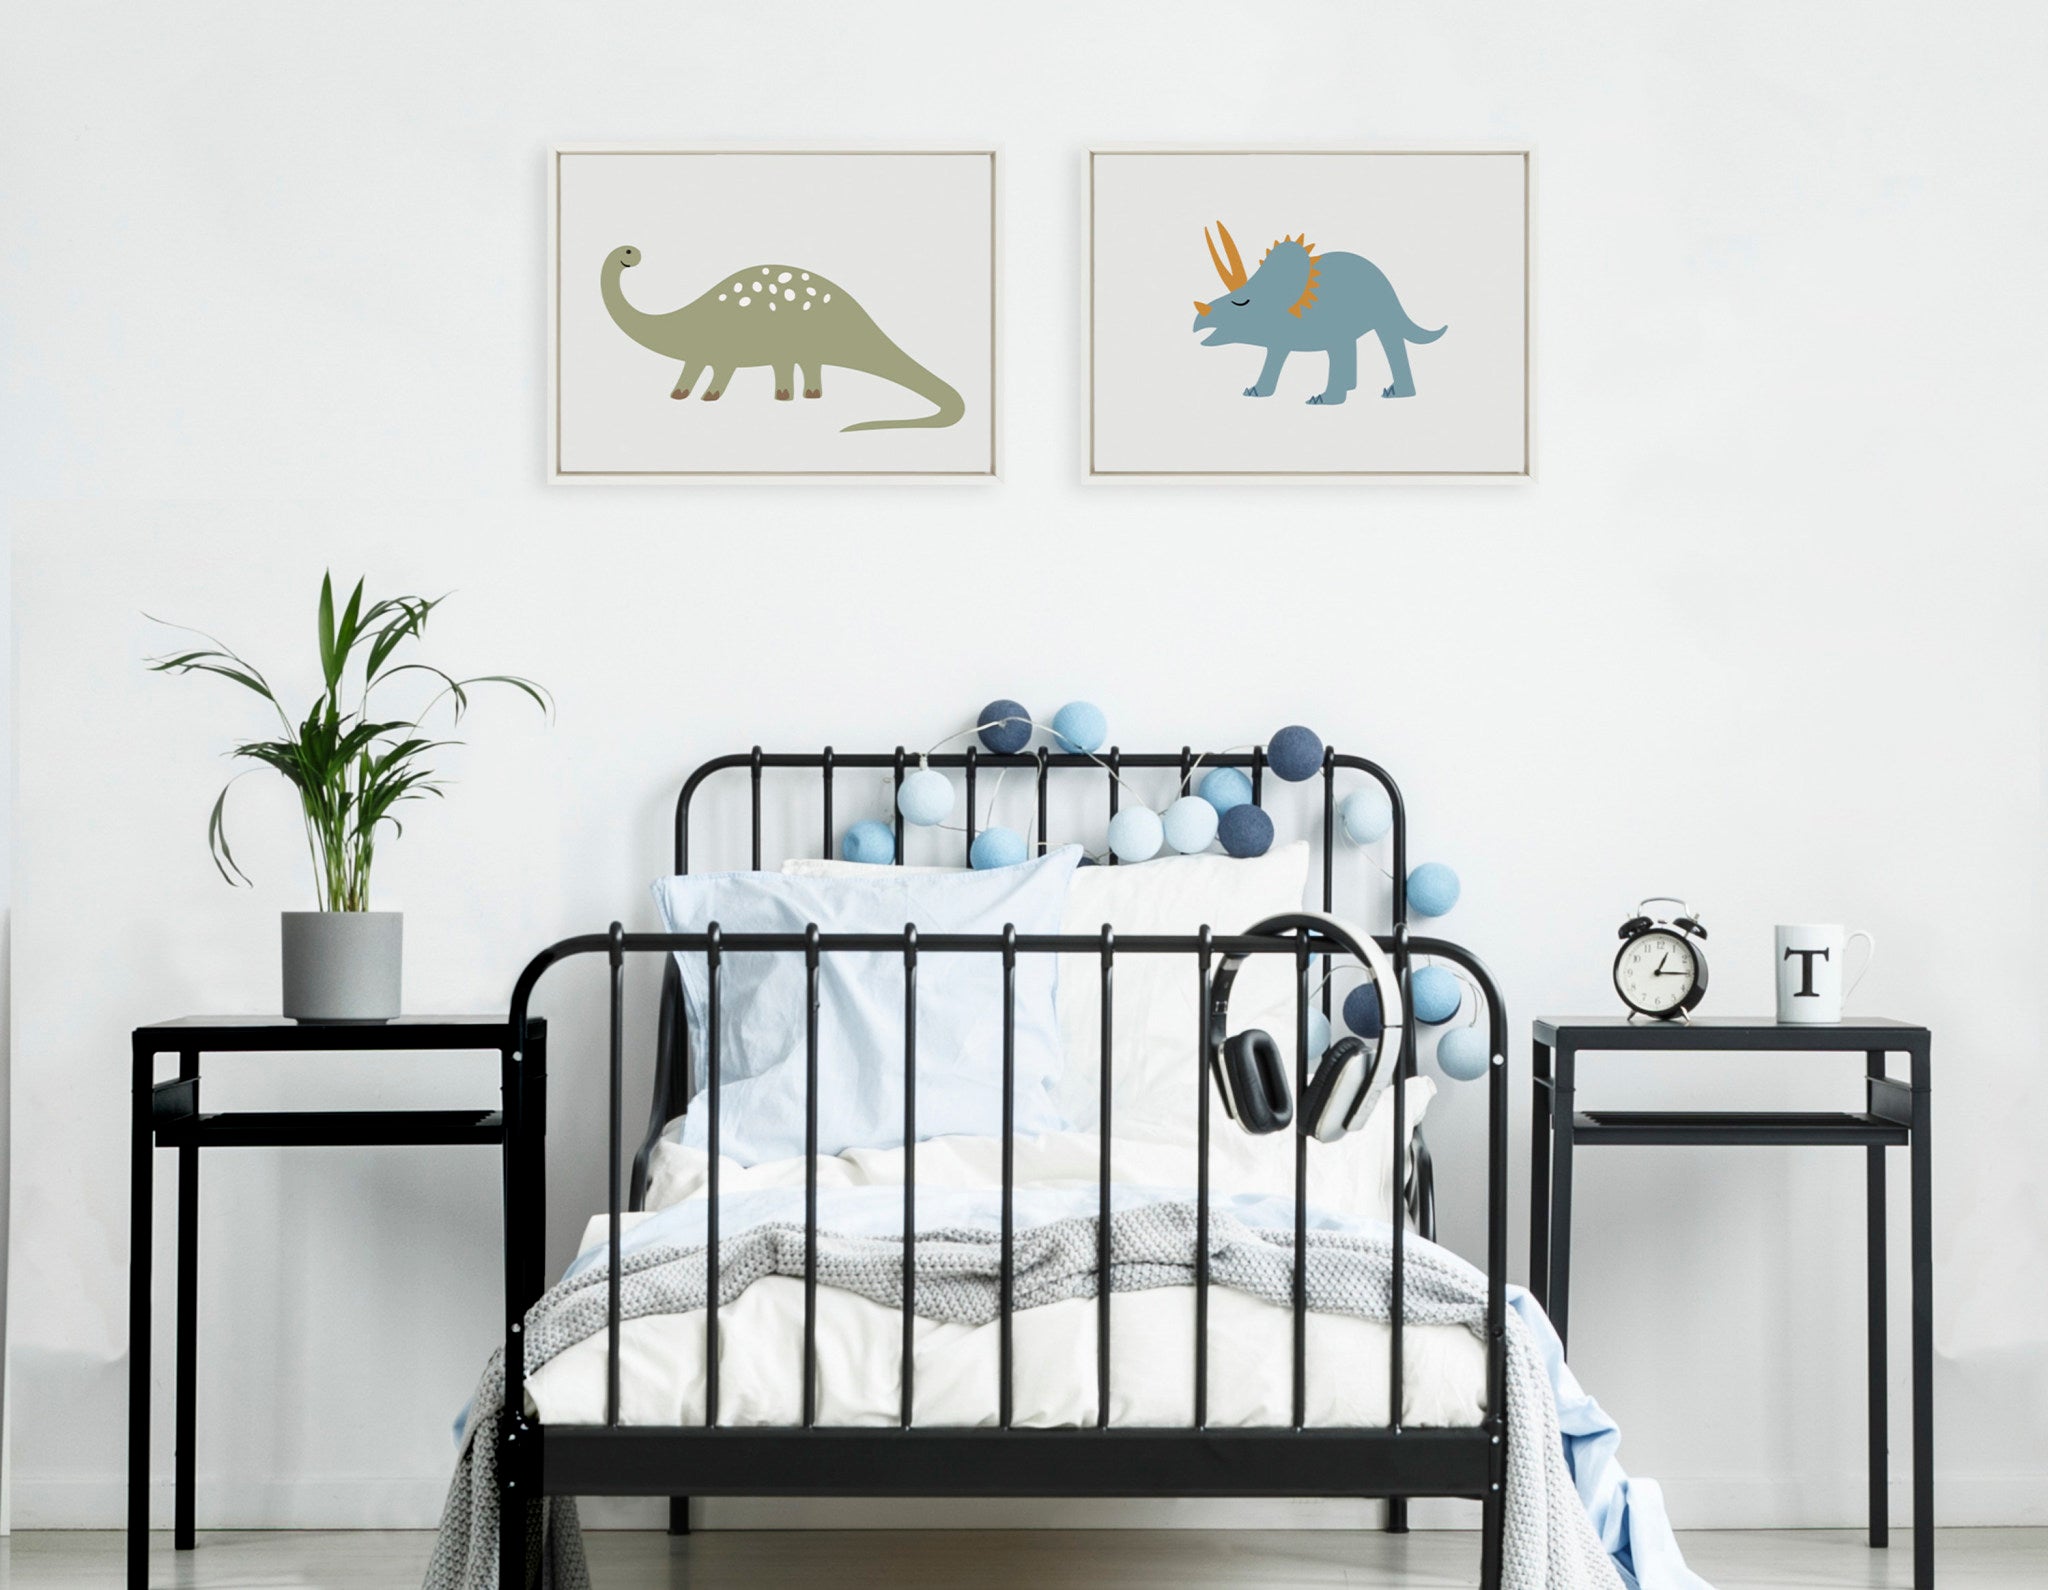 Sylvie 1013 Brontosaurus and 1013 Triceratops Framed Canvas Art Set by Teju Reval of SnazzyHues